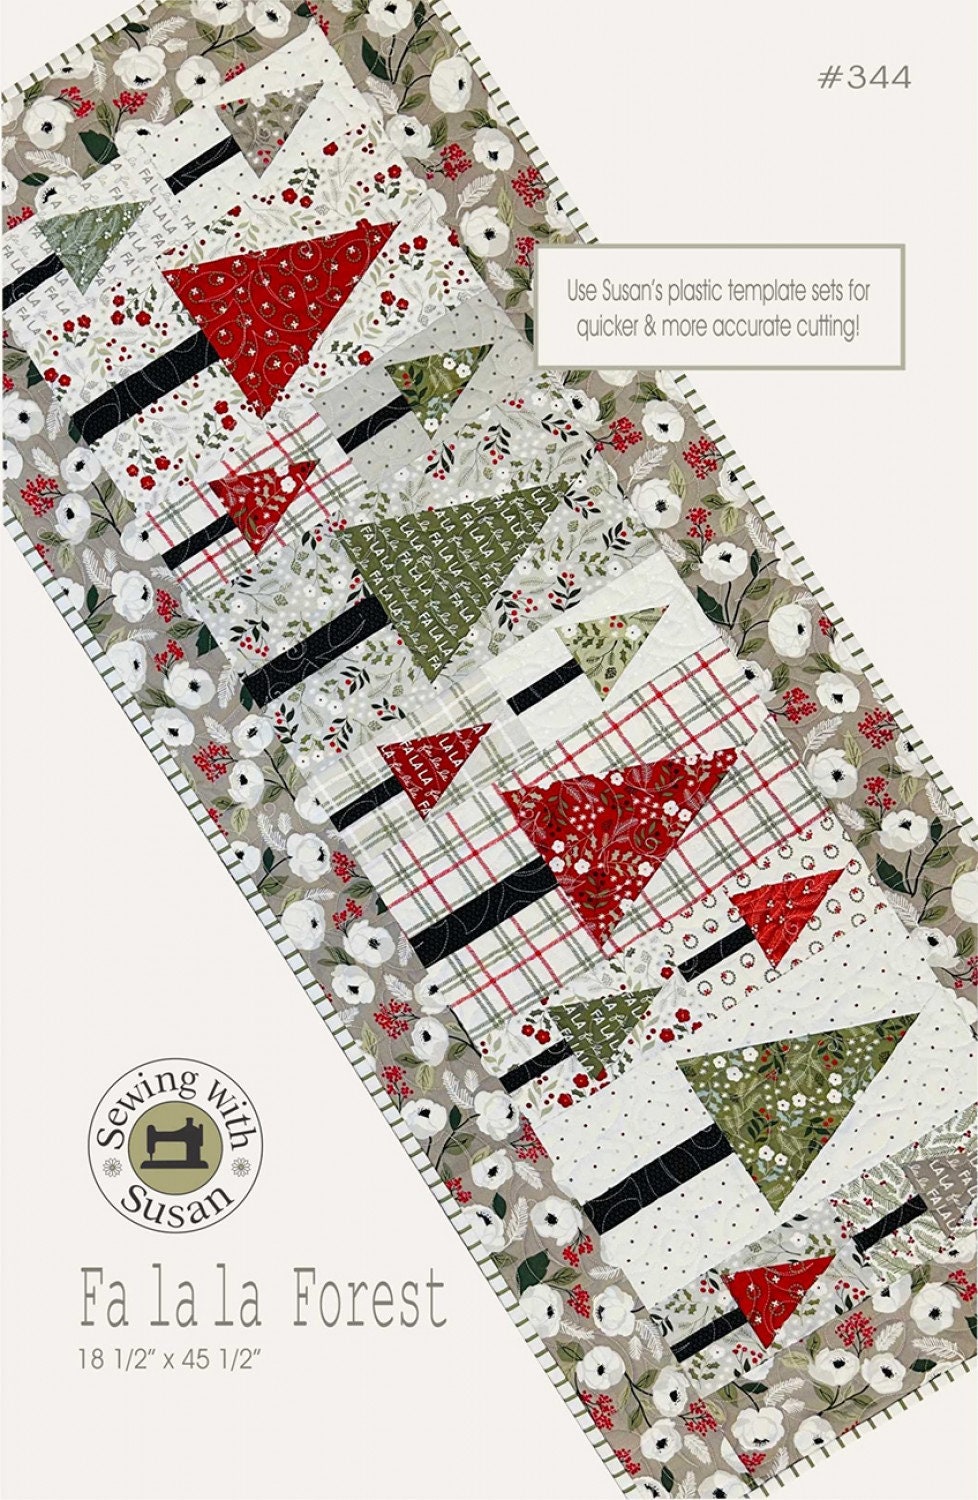 12 PCs Quilting Template Set Includes 8 Quilting Templates